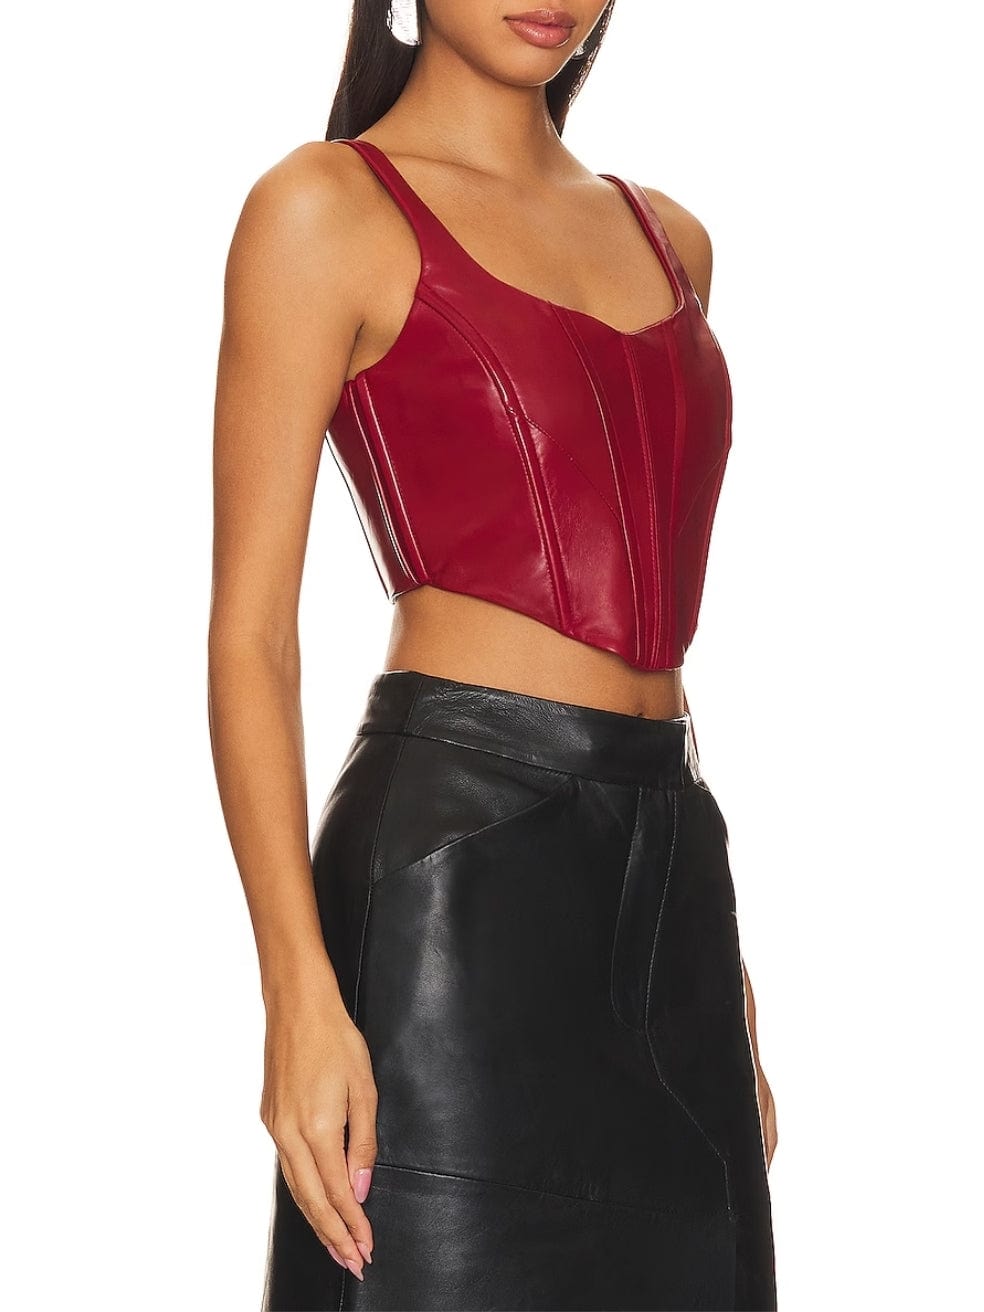 Lamarque Leather Red Bustier Top